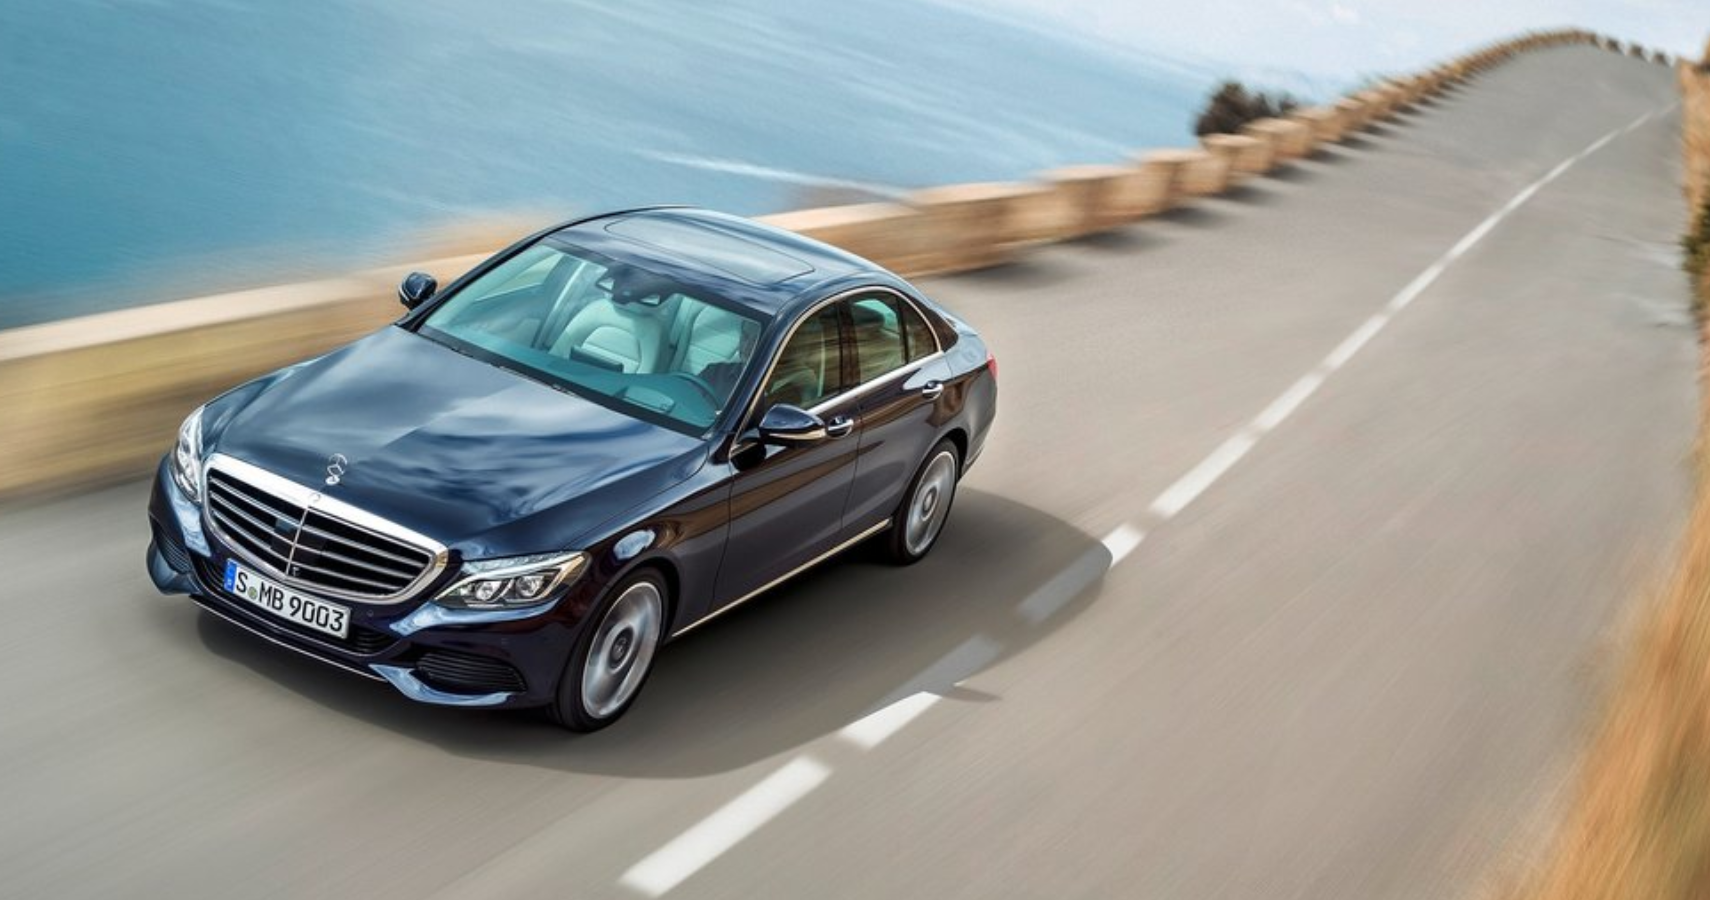 Why We Wouldn't Touch A 2015 Mercedes-Benz C-Class With A 10-Foot Pole